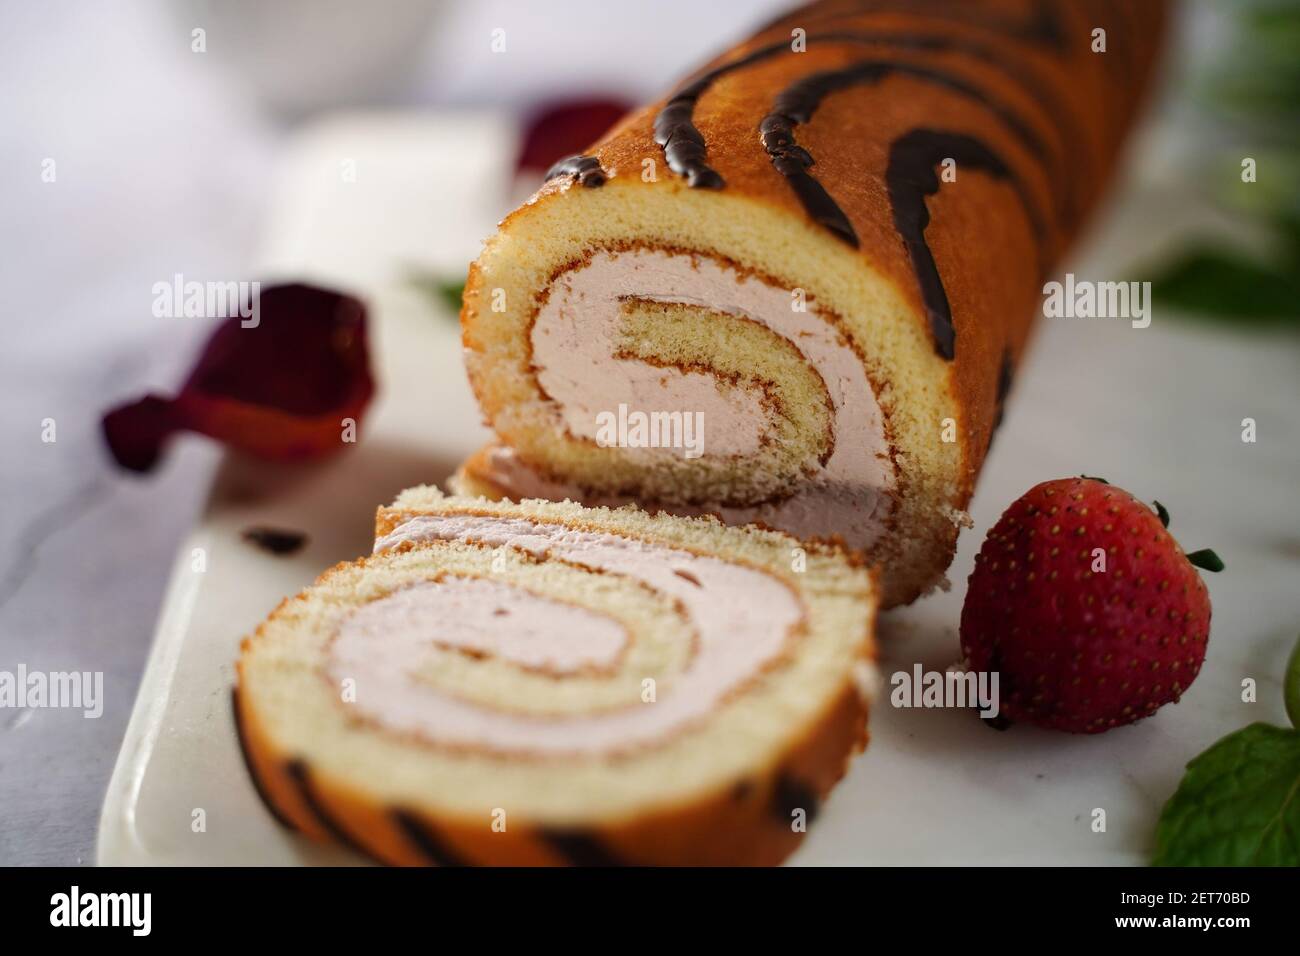 Strawberry Swiss roll or Roulade with cream filling and chocolate drizzle, selective focus Stock Photo